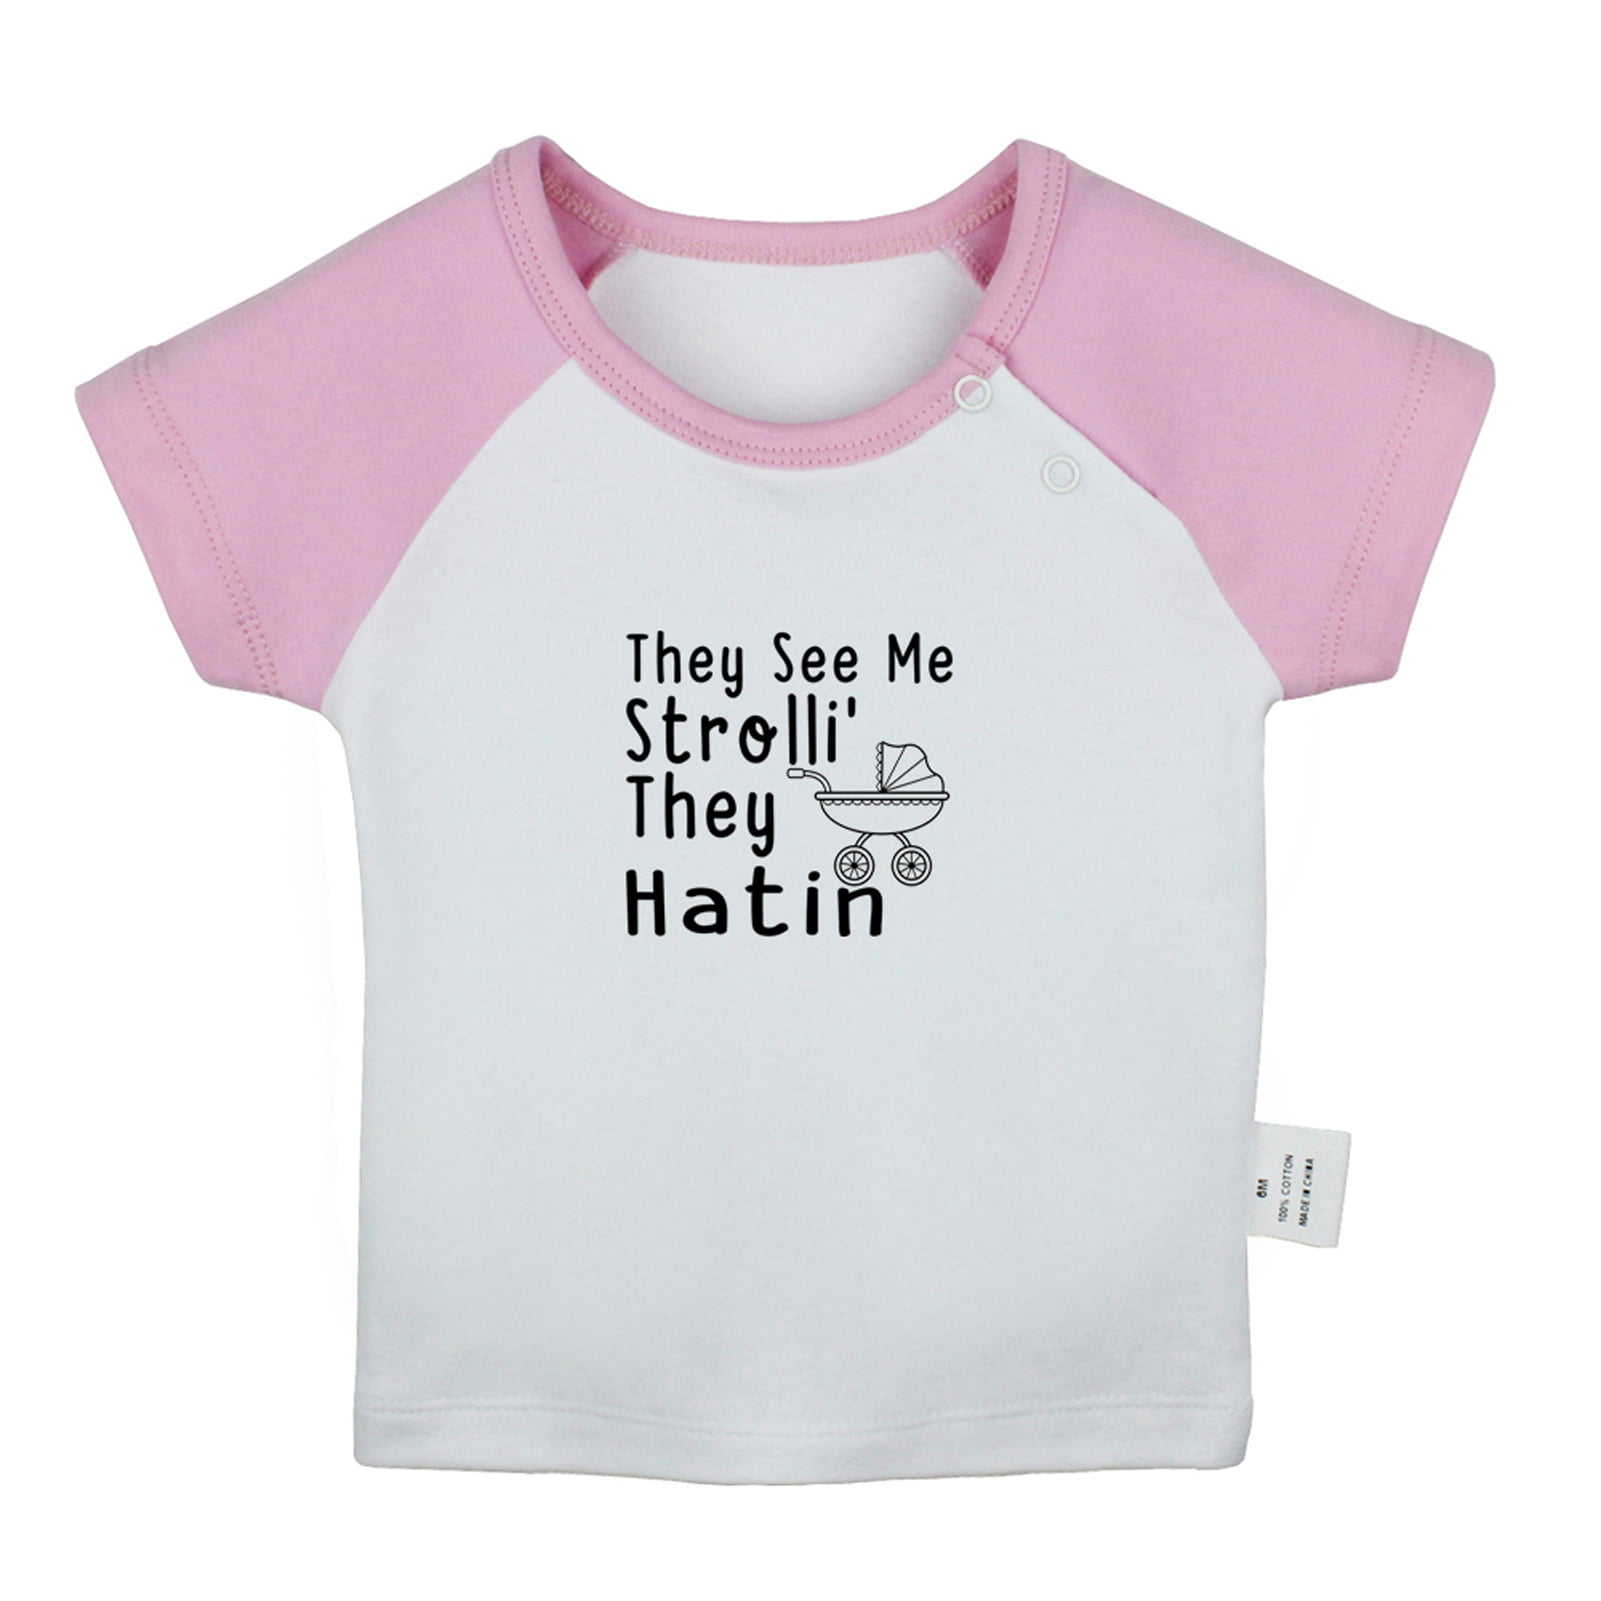 They See Me Strolli' They Funny T shirt For Baby, Newborn T- shirts, Tops, 0-24M Kids Graphic Tees Clothing Pink Raglan T- shirt, 18-24 Months) - Walmart.com